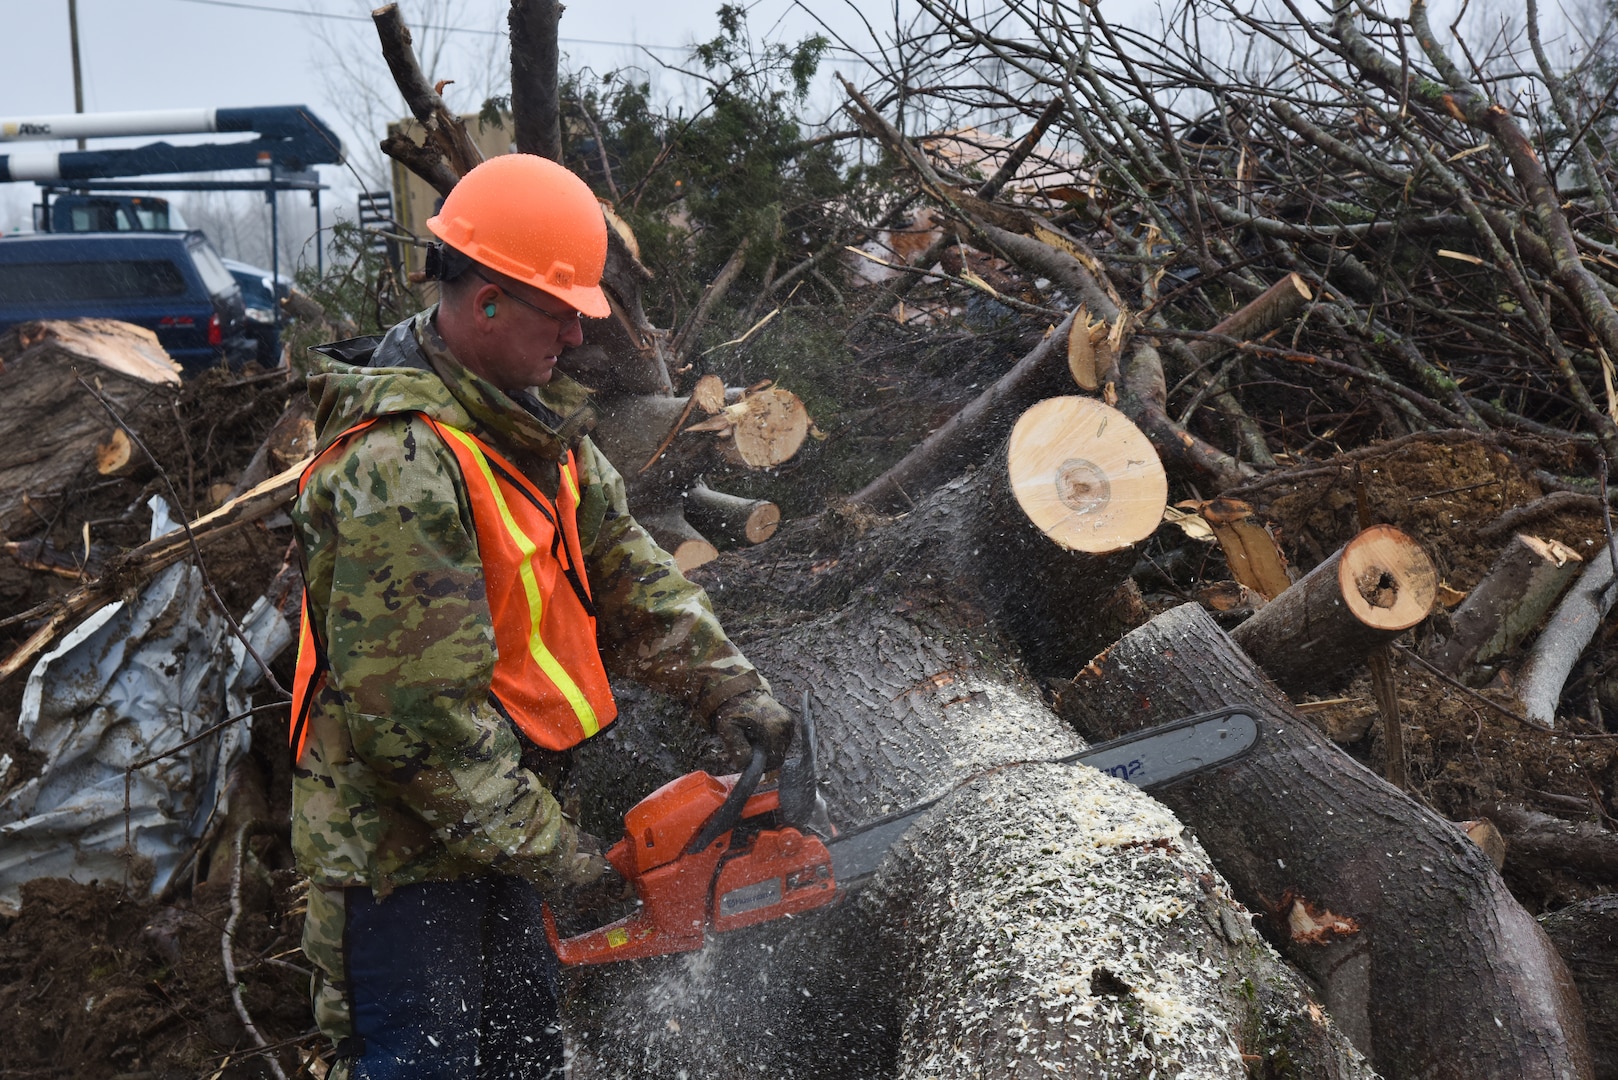 A Tennessee Air National Guard member with the 134th Air Refueling Wing uses a chainsaw March 10, 2020, in Cookeville as part of a debris clearing operation. Both Air and Army National Guard members are conducting multiple operations throughout the state to aid in disaster relief efforts, after tornadoes ravaged central Tennessee March 3.